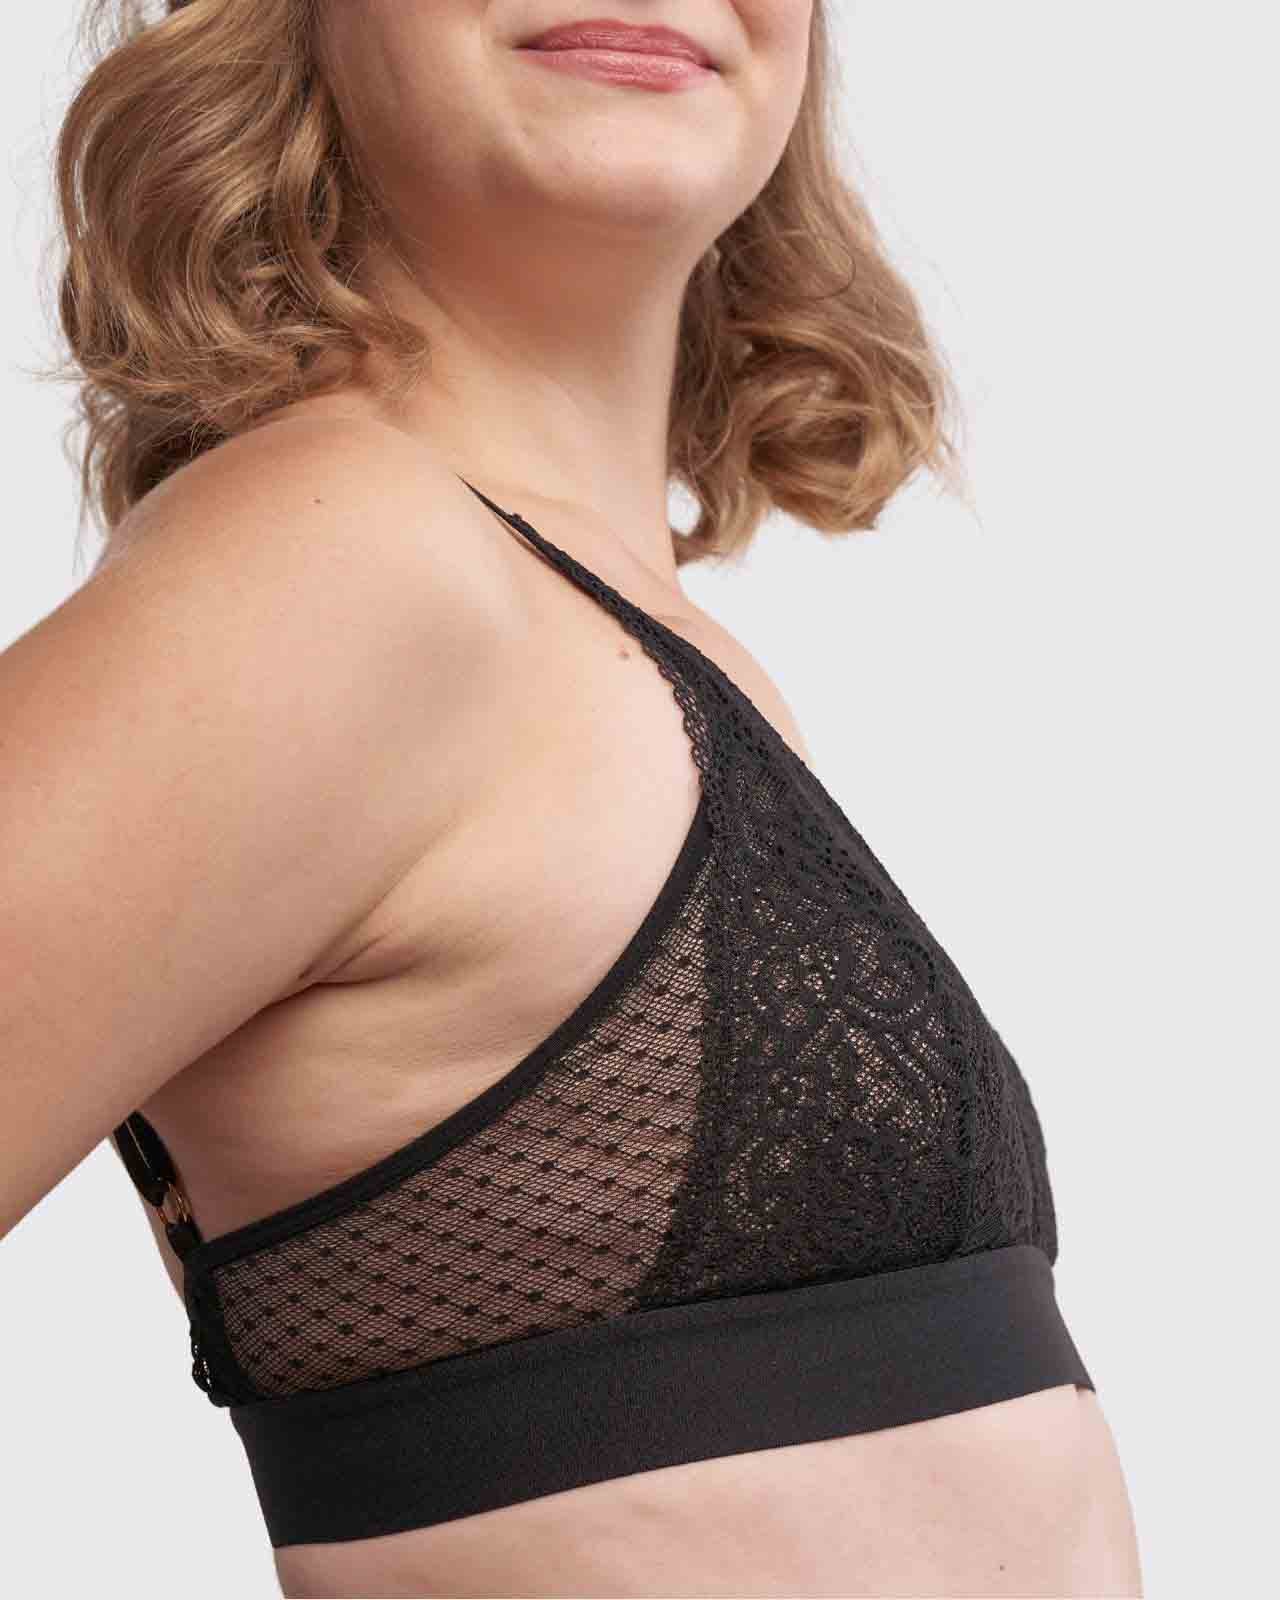 Anaono Women's Maggie Sexy Post-mastectomy Lace Bralette Black - Small :  Target